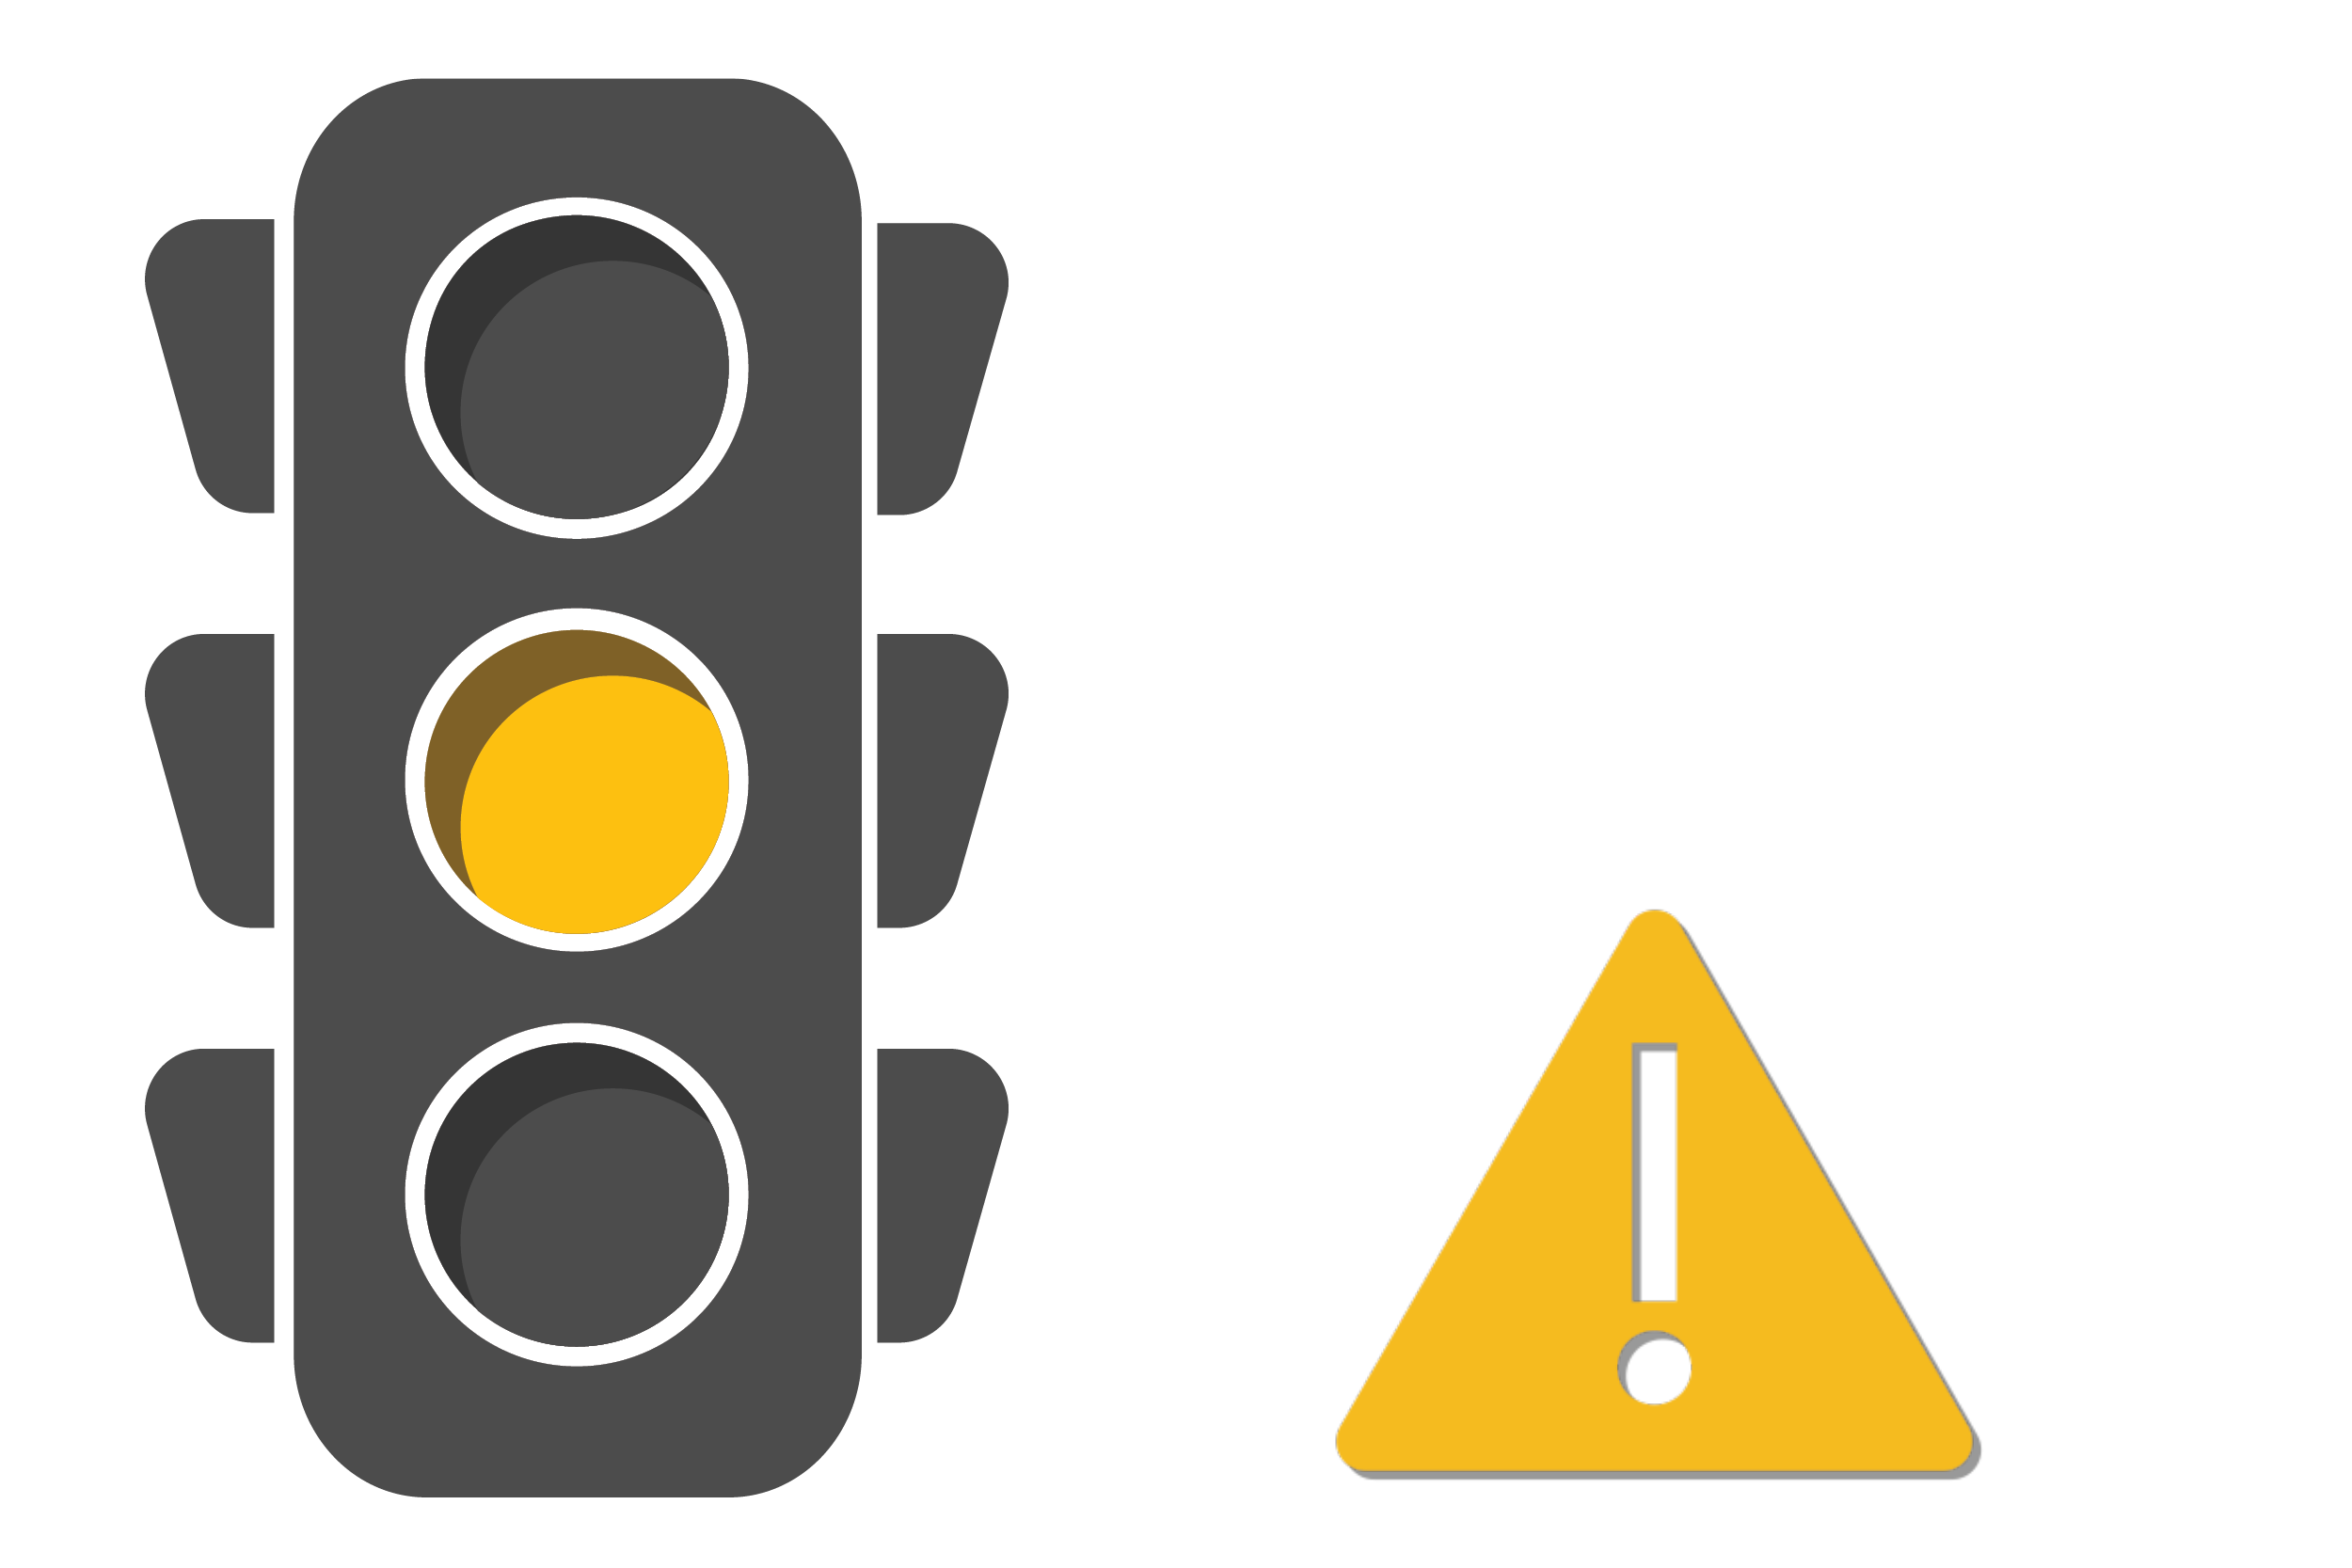 Stop light with yellow light and exclamation point icon